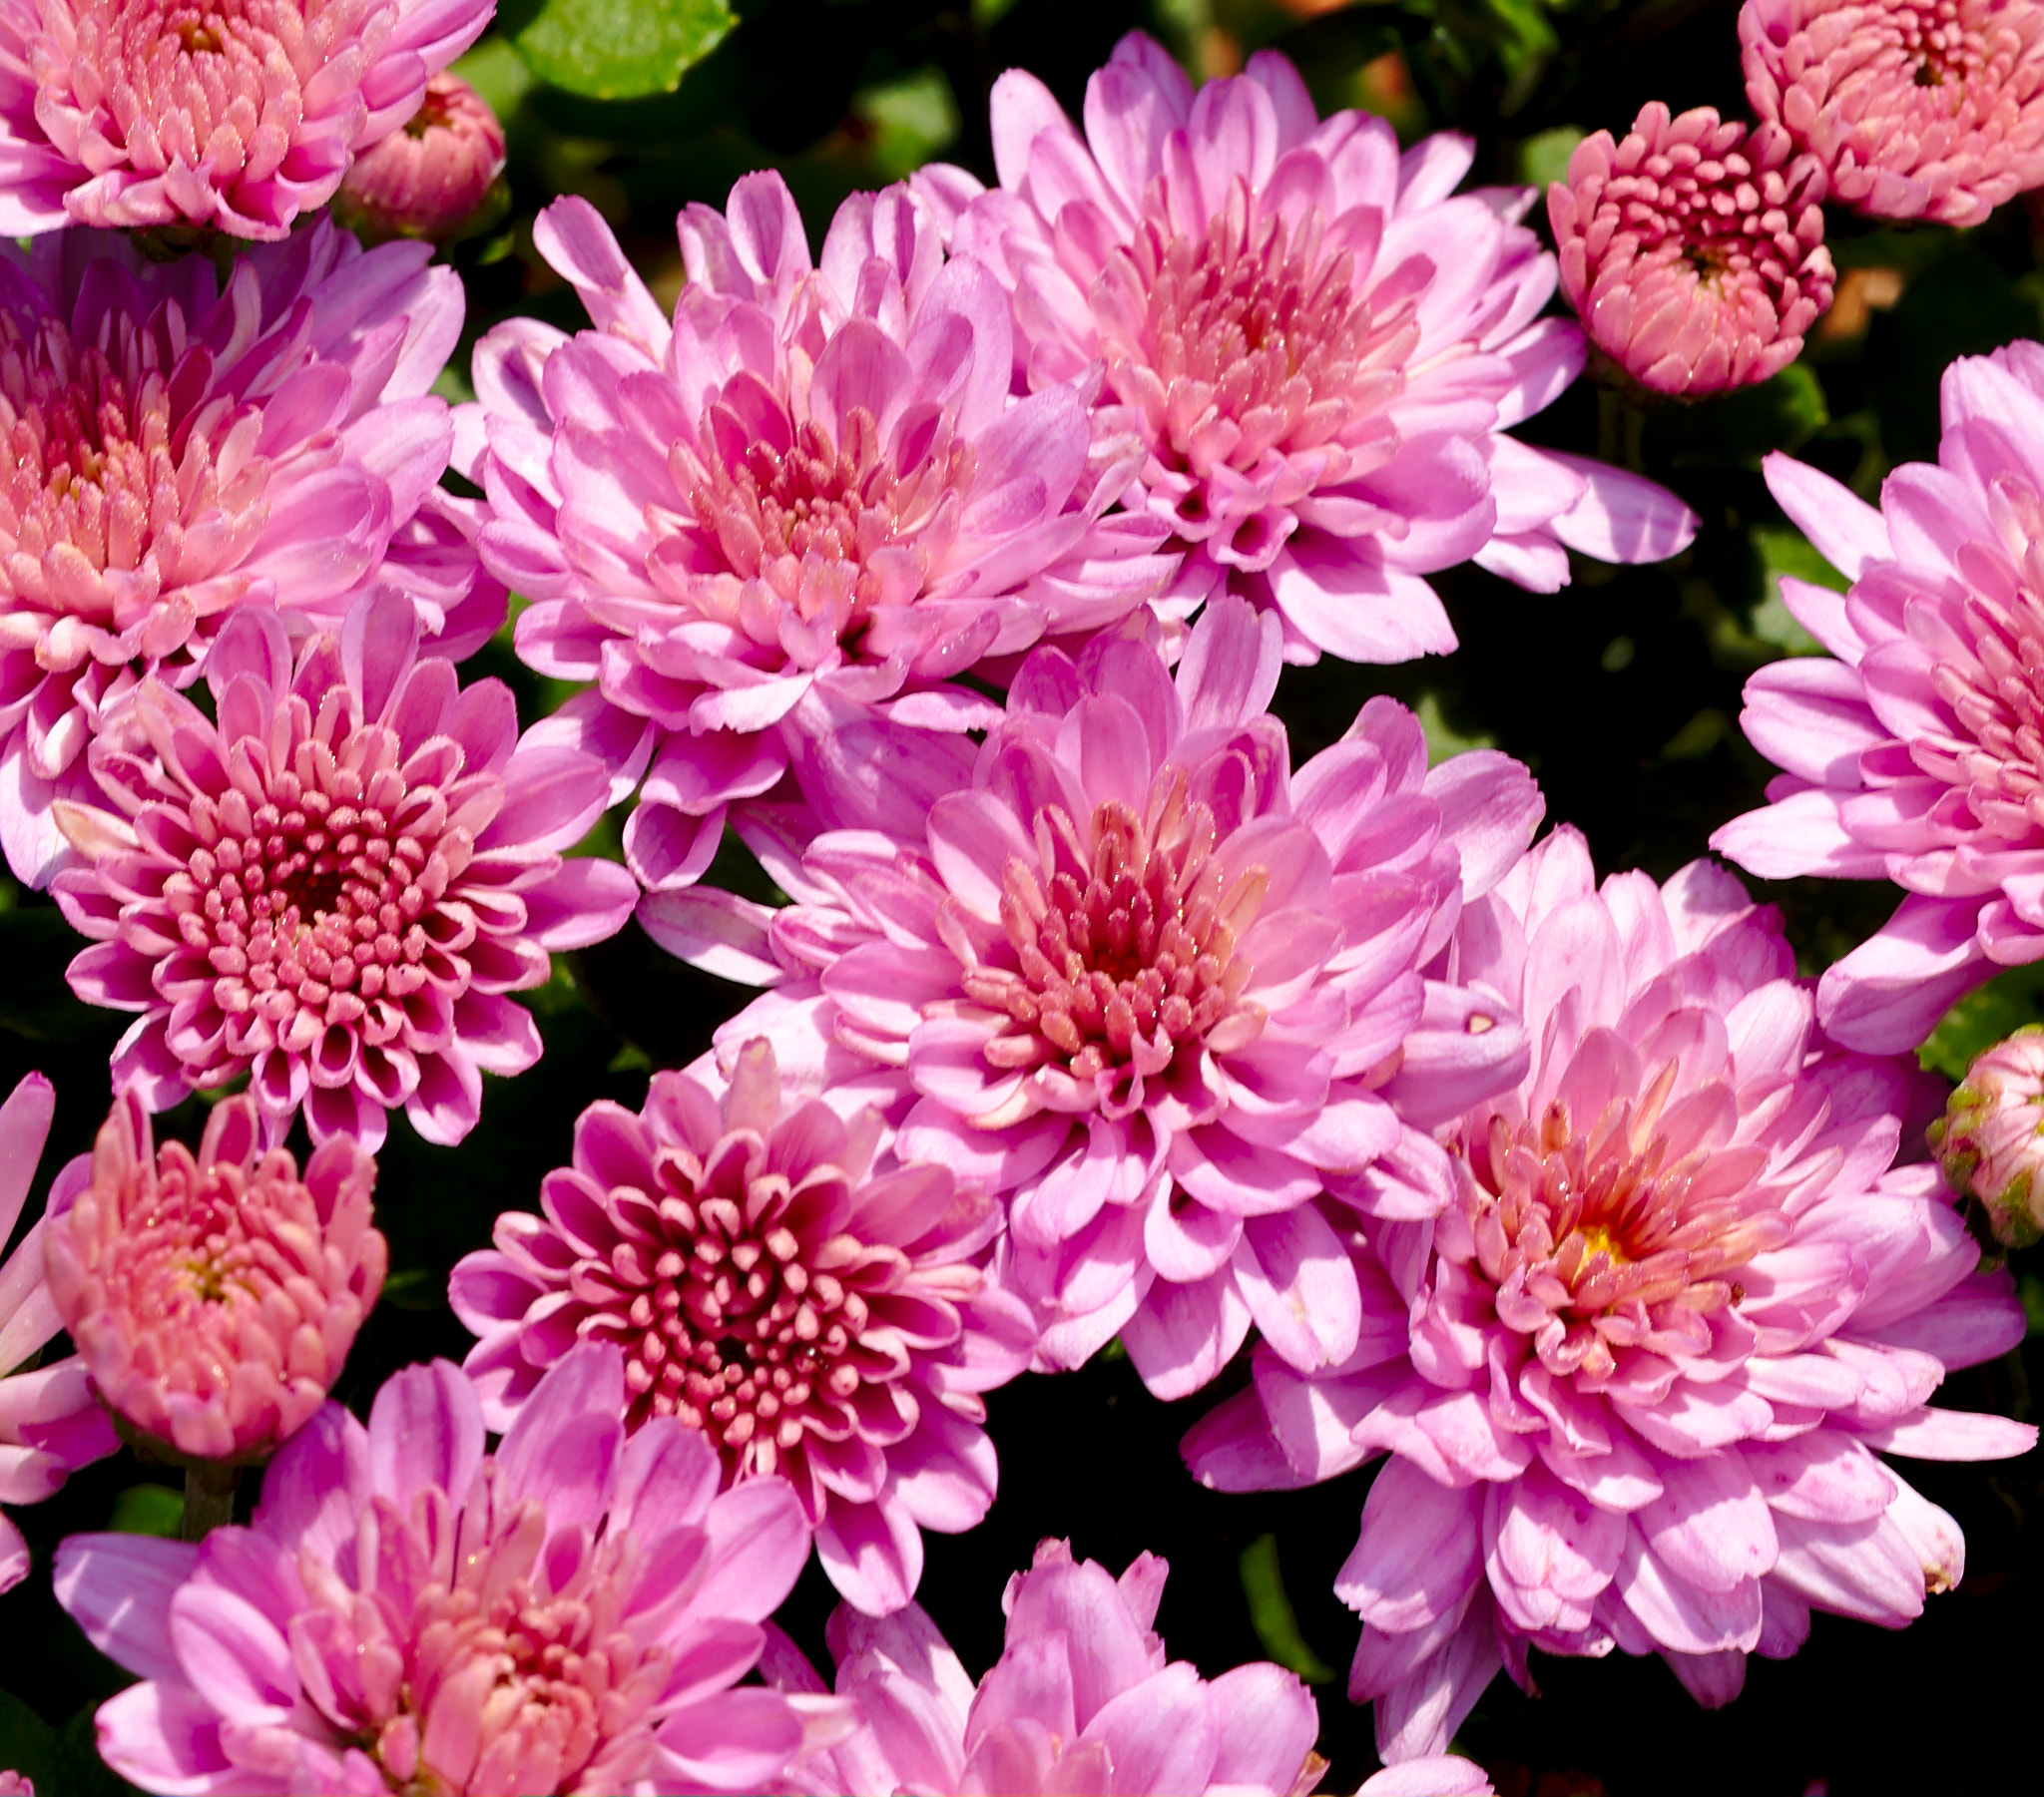 ZEISS Otus 85mm F1.4 sample photo. A cluster of pink mum / chrysanthemum photography